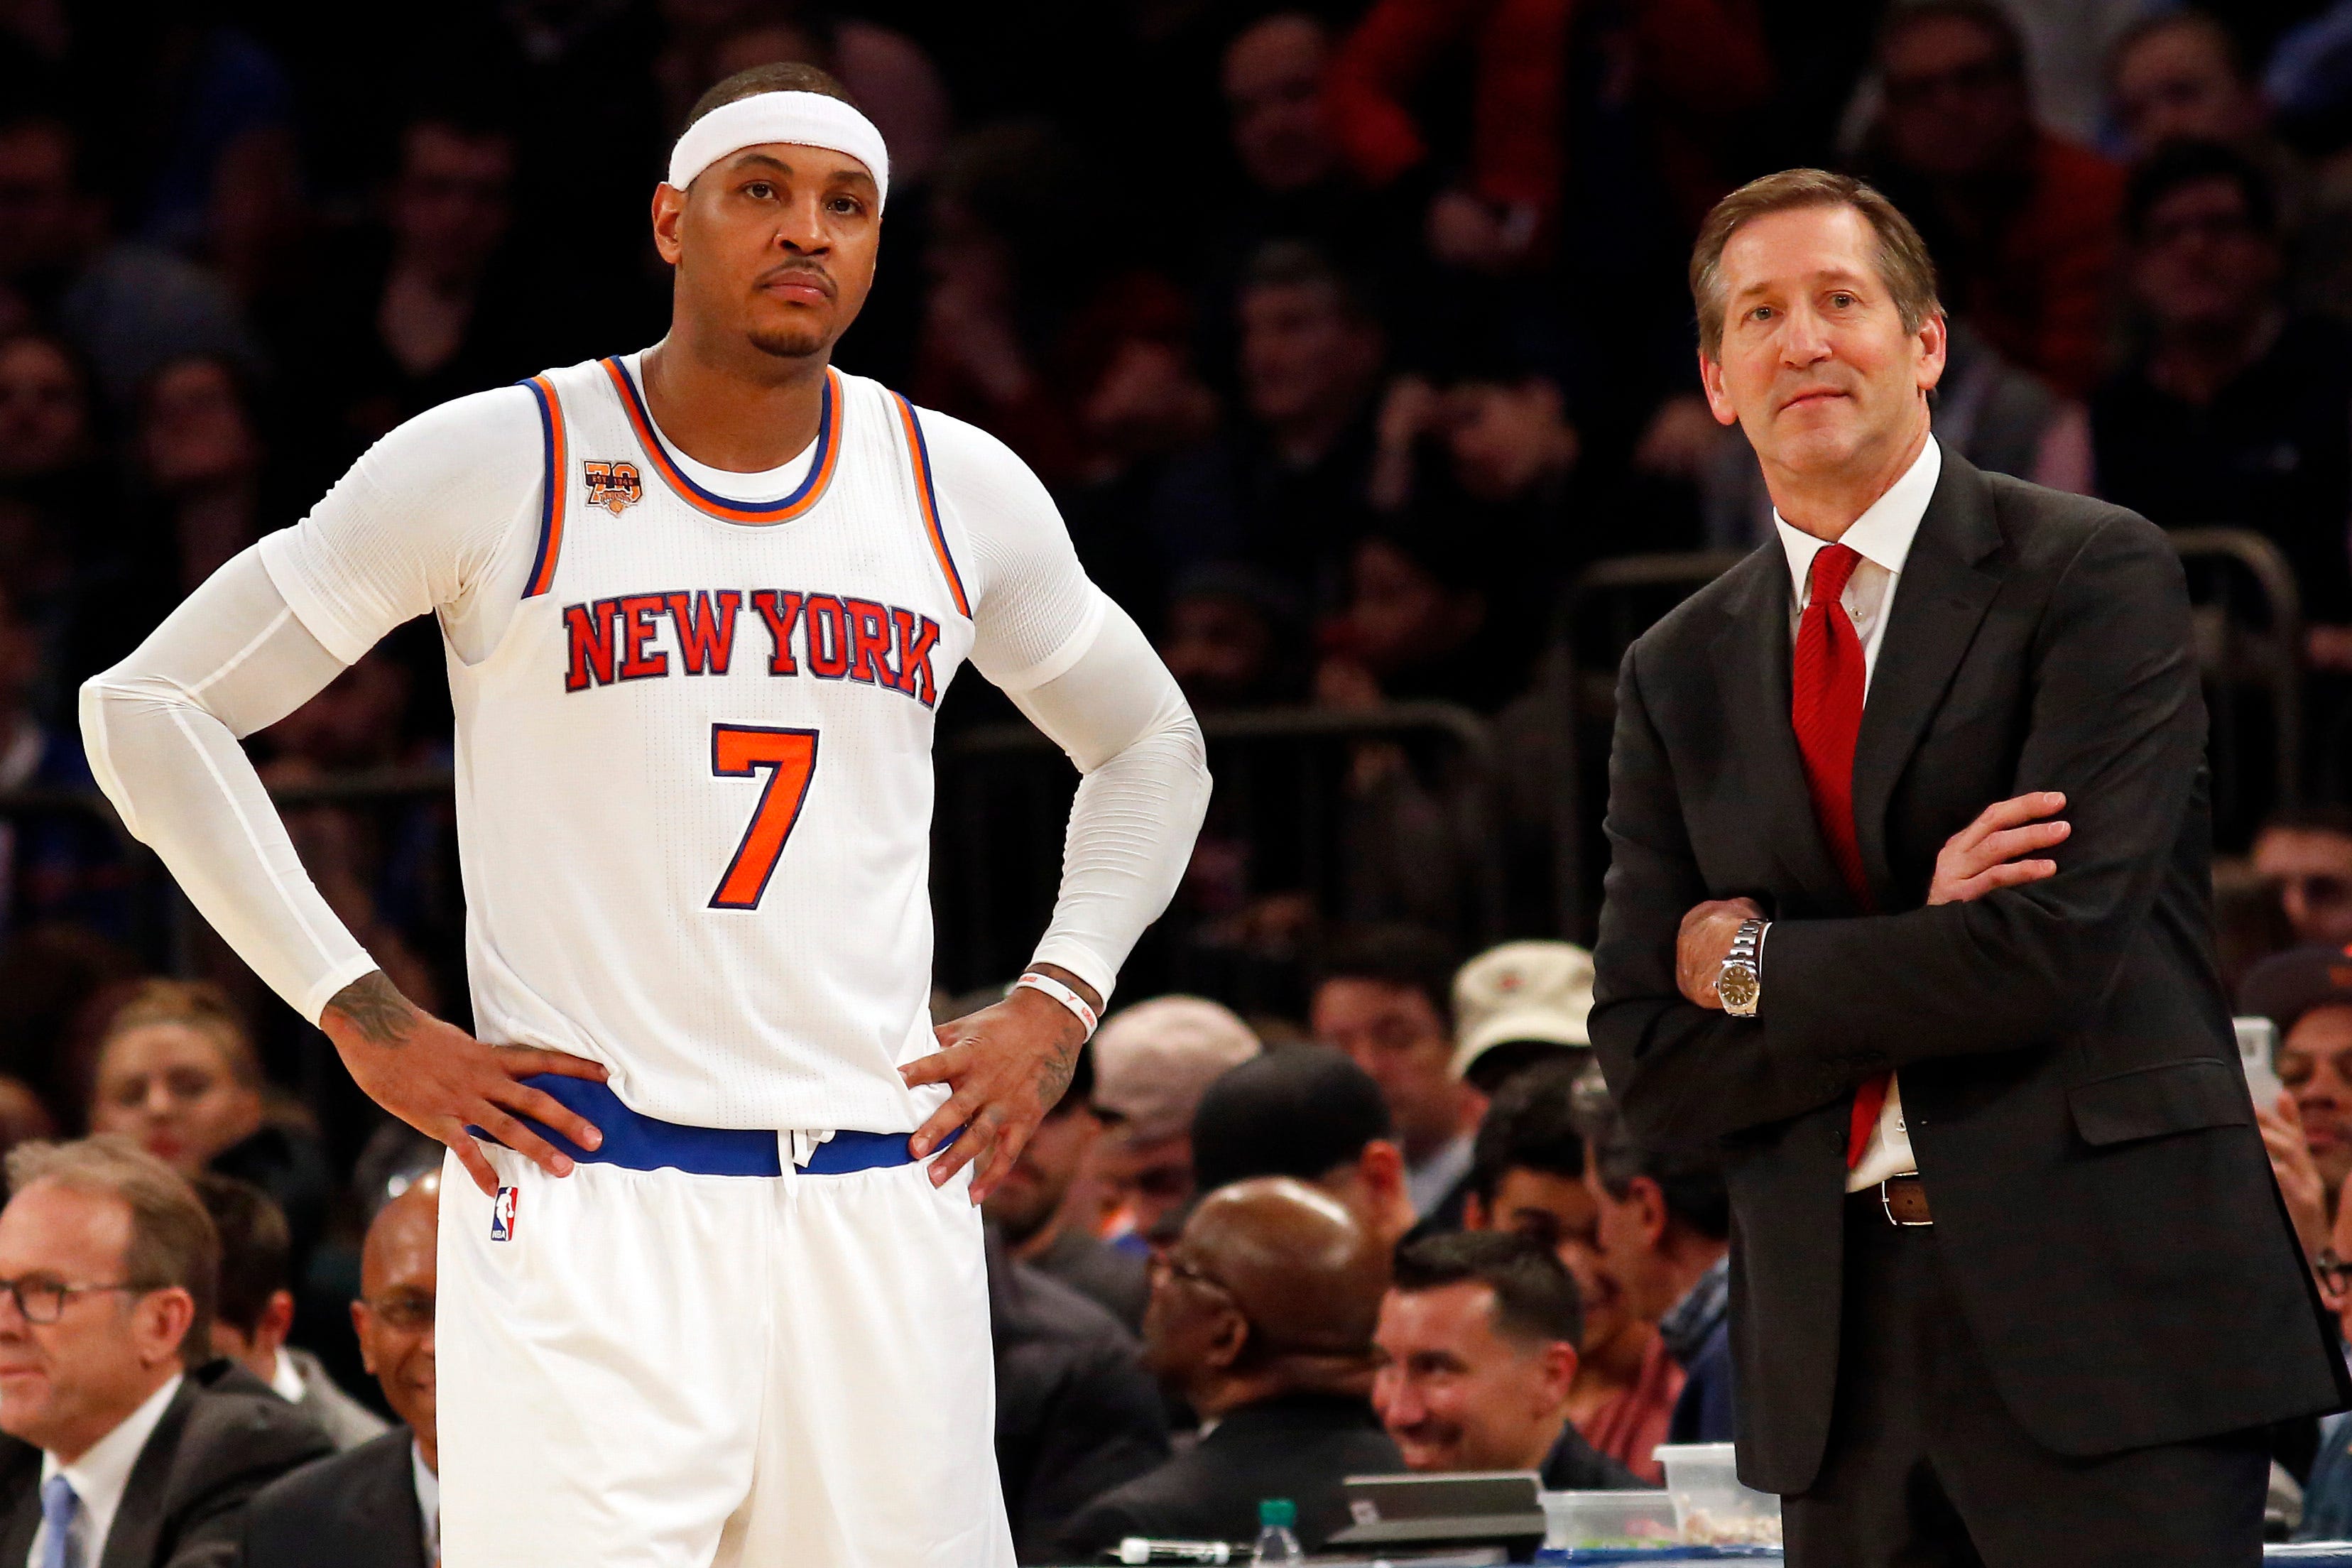 Week 11 NBA power rankings: Wizards rising, Knicks continue to fall